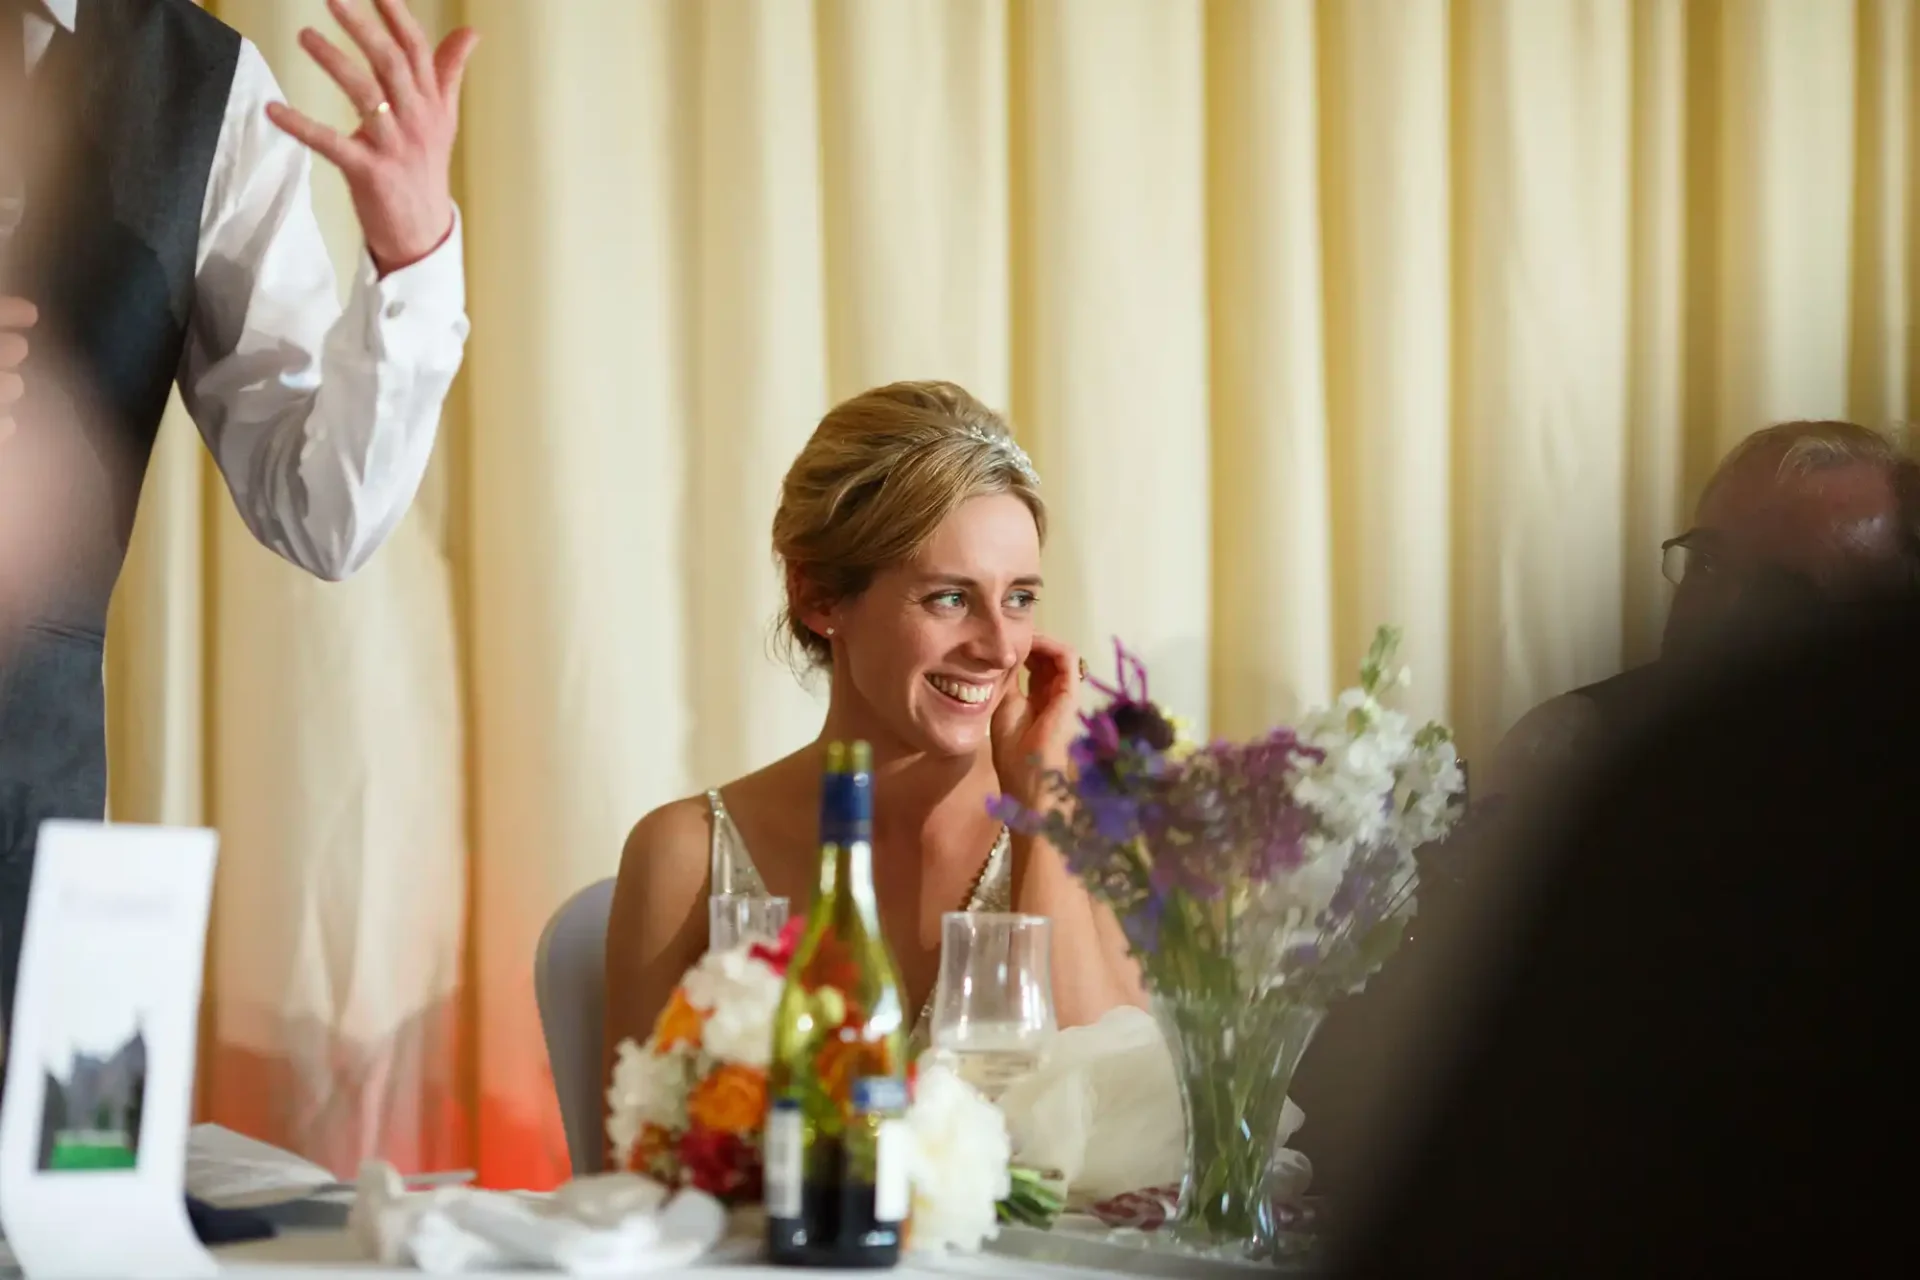 A bride at a wedding reception table, smiling and looking to her left, with guests and decorations around her.